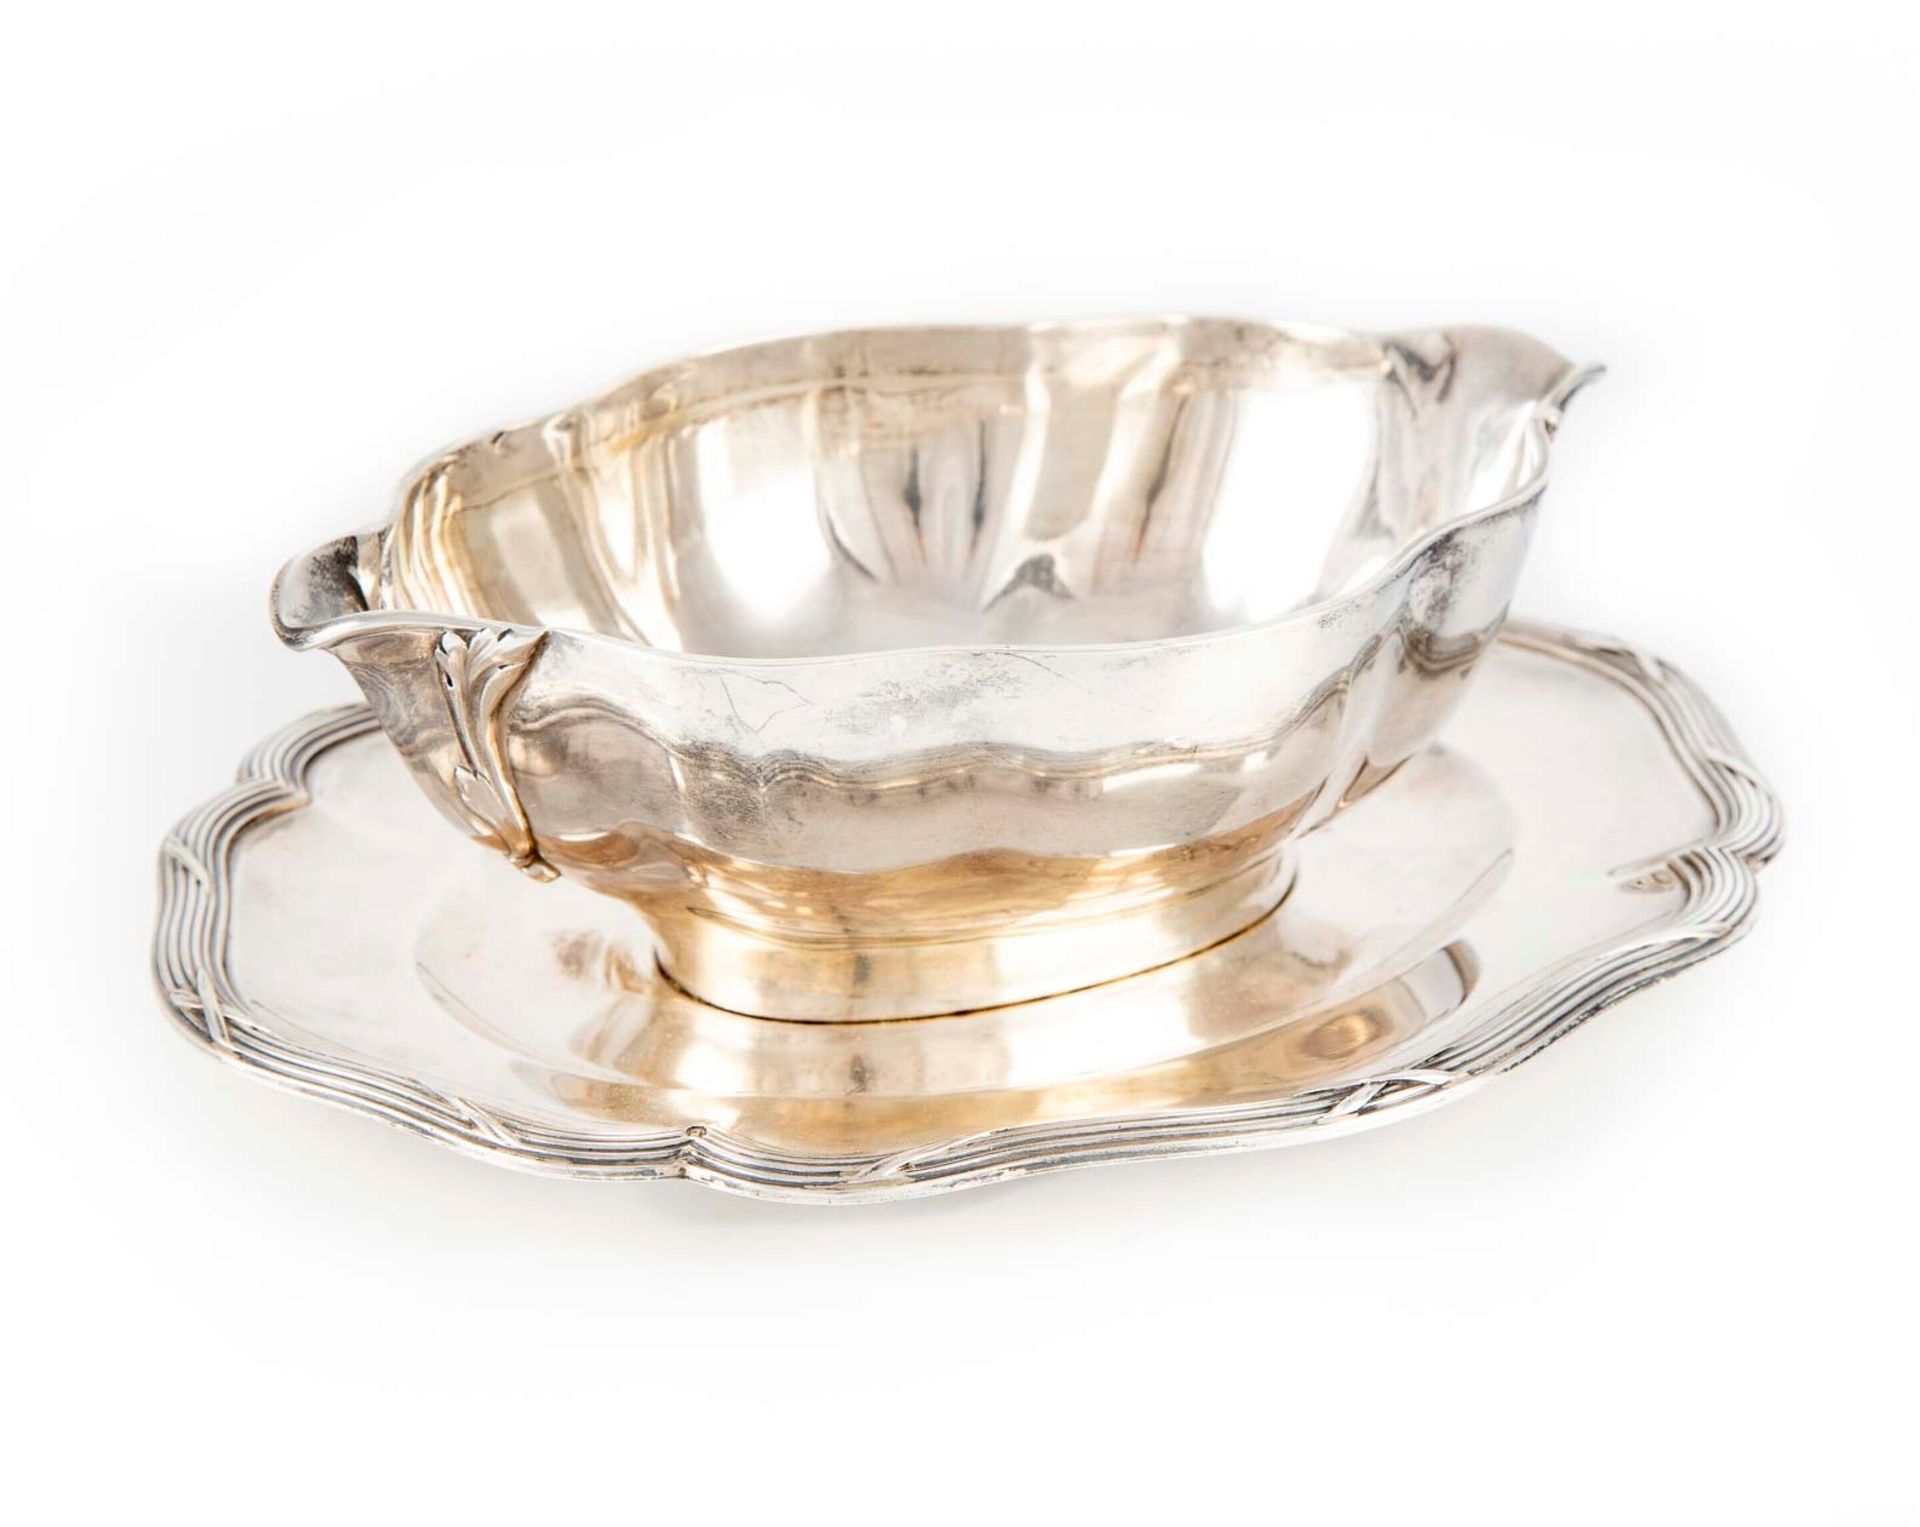 CARDEILHAC House of CARDEILHAC

Sauceboat and its tray in silver, Minerve mark, &hellip;